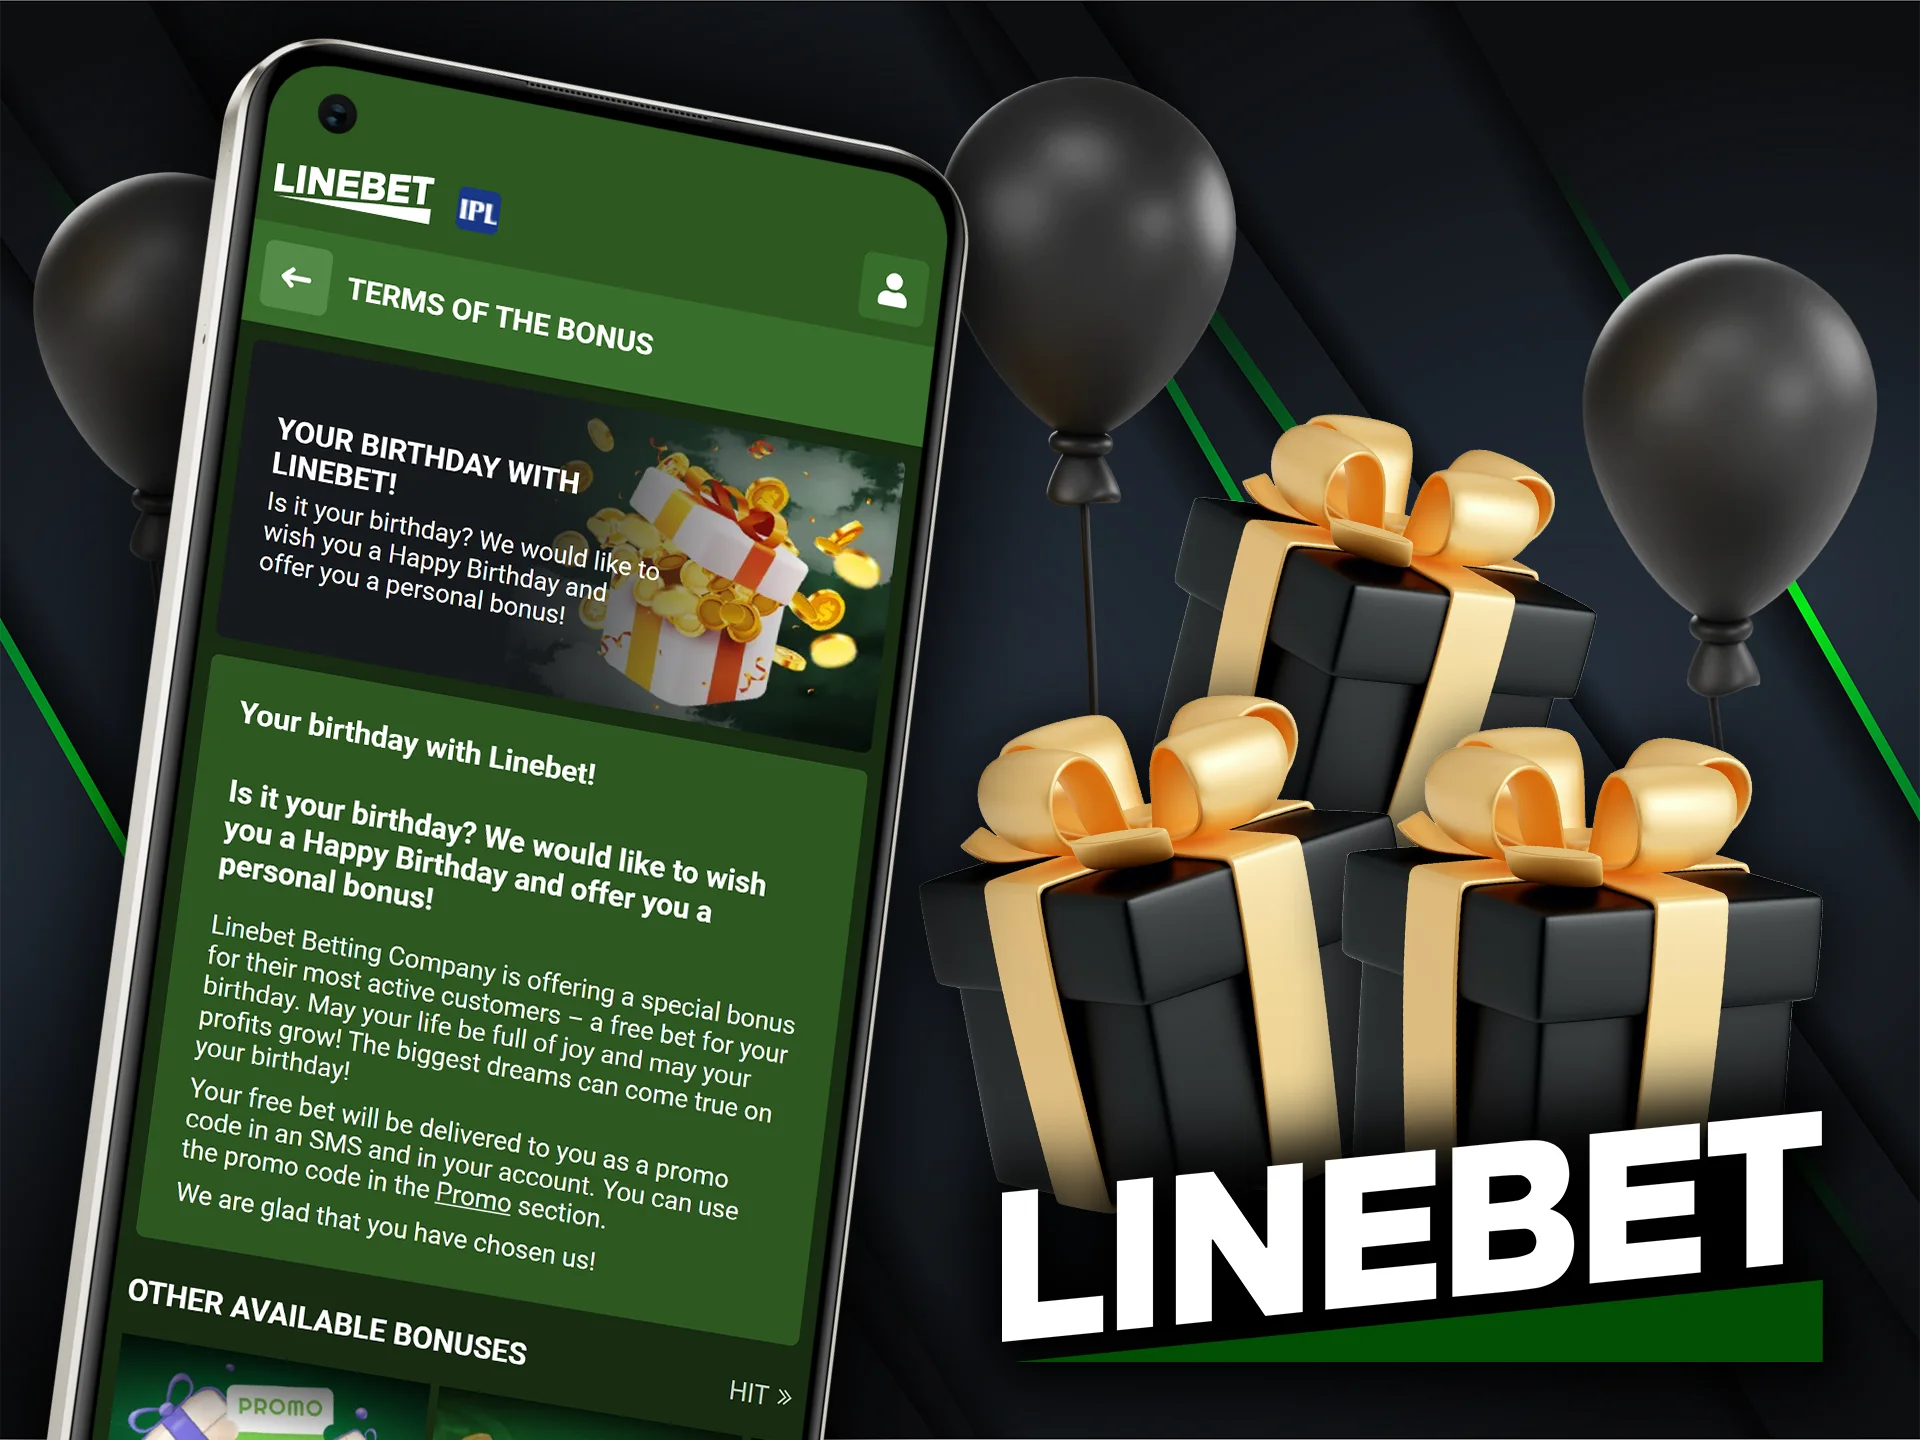 Don't forget to get your Linebet birthday bonus.